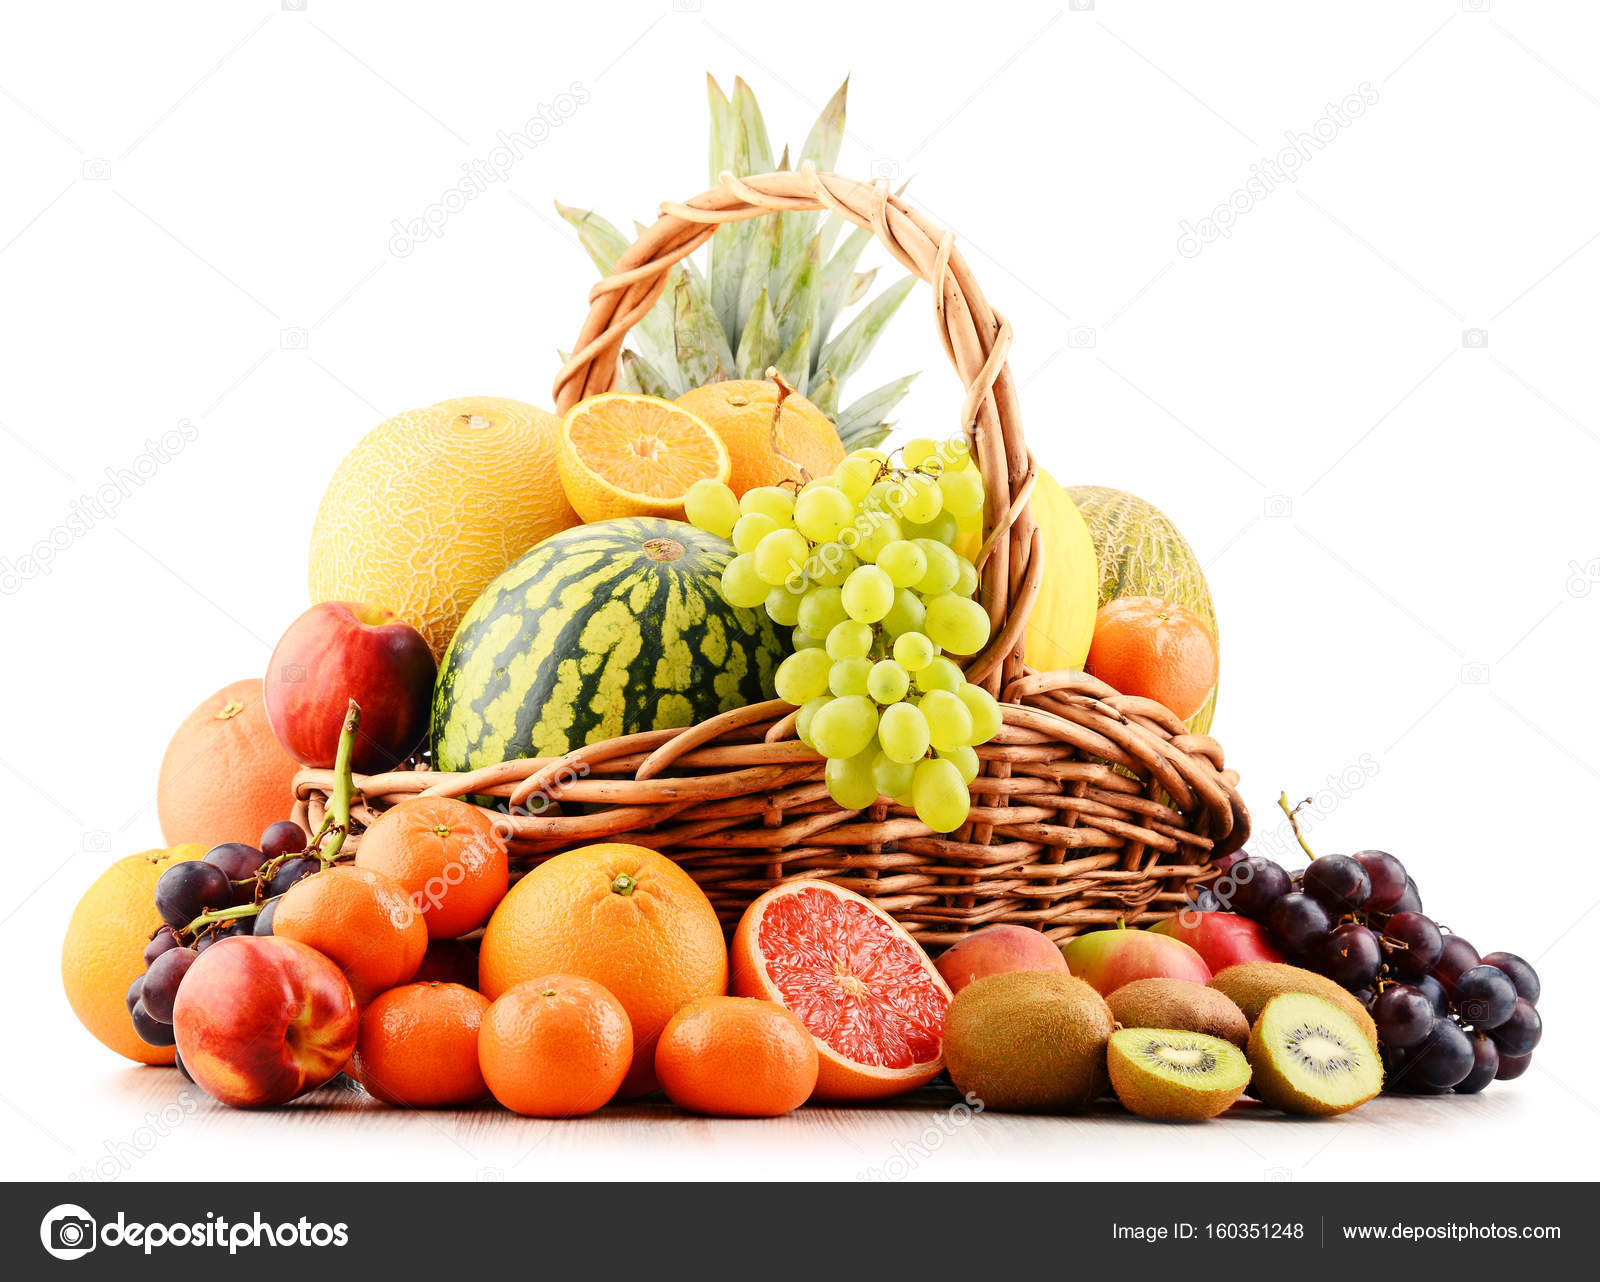 Composition with assorted fruits — Stock Photo © monticello #160351248